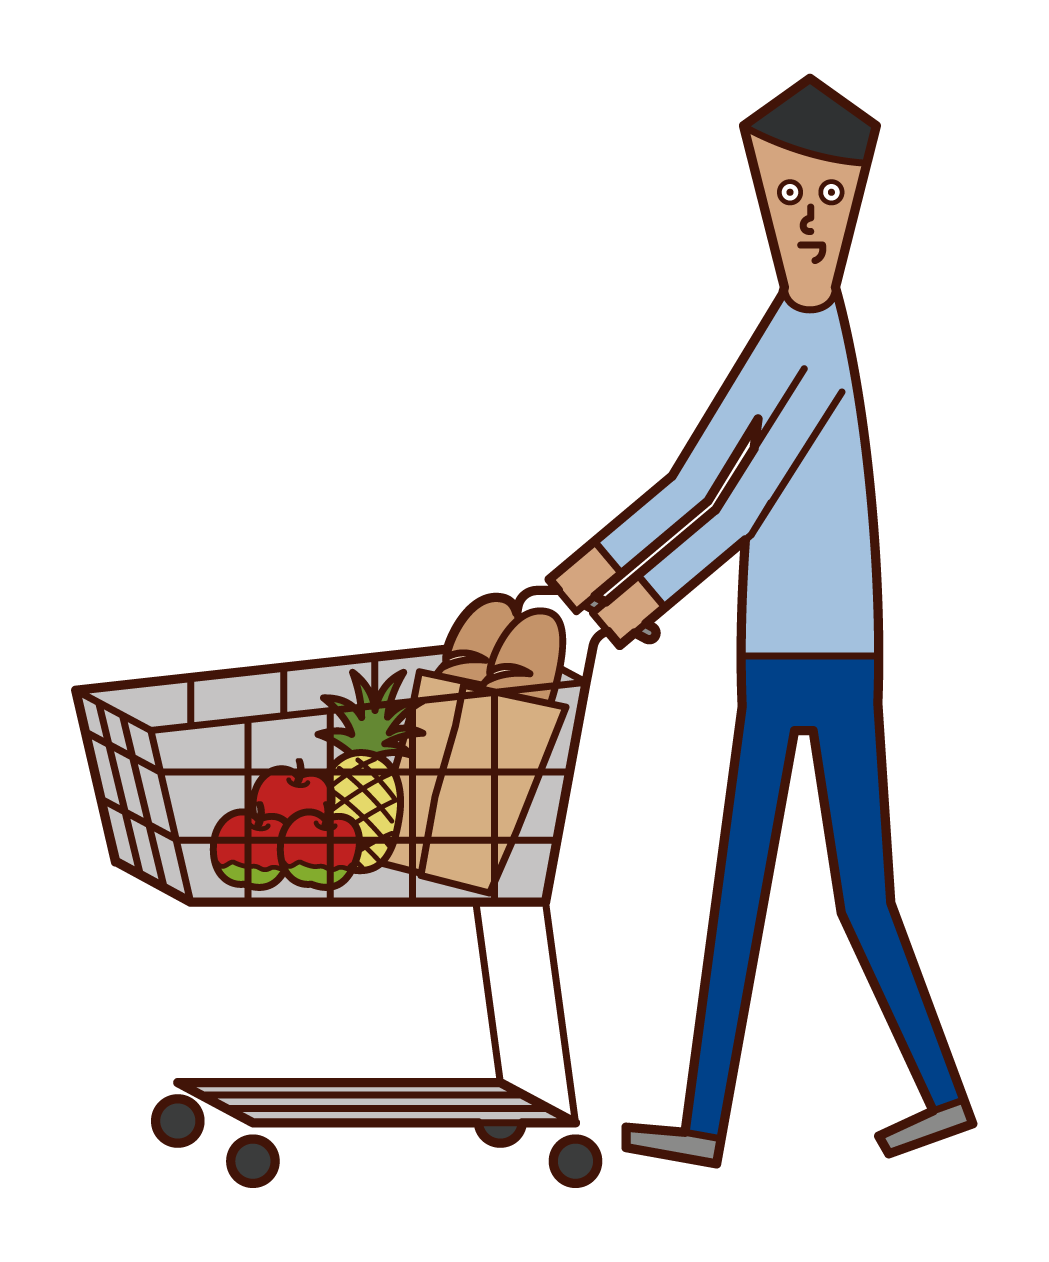 Illustration of a man shopping in a supermarket